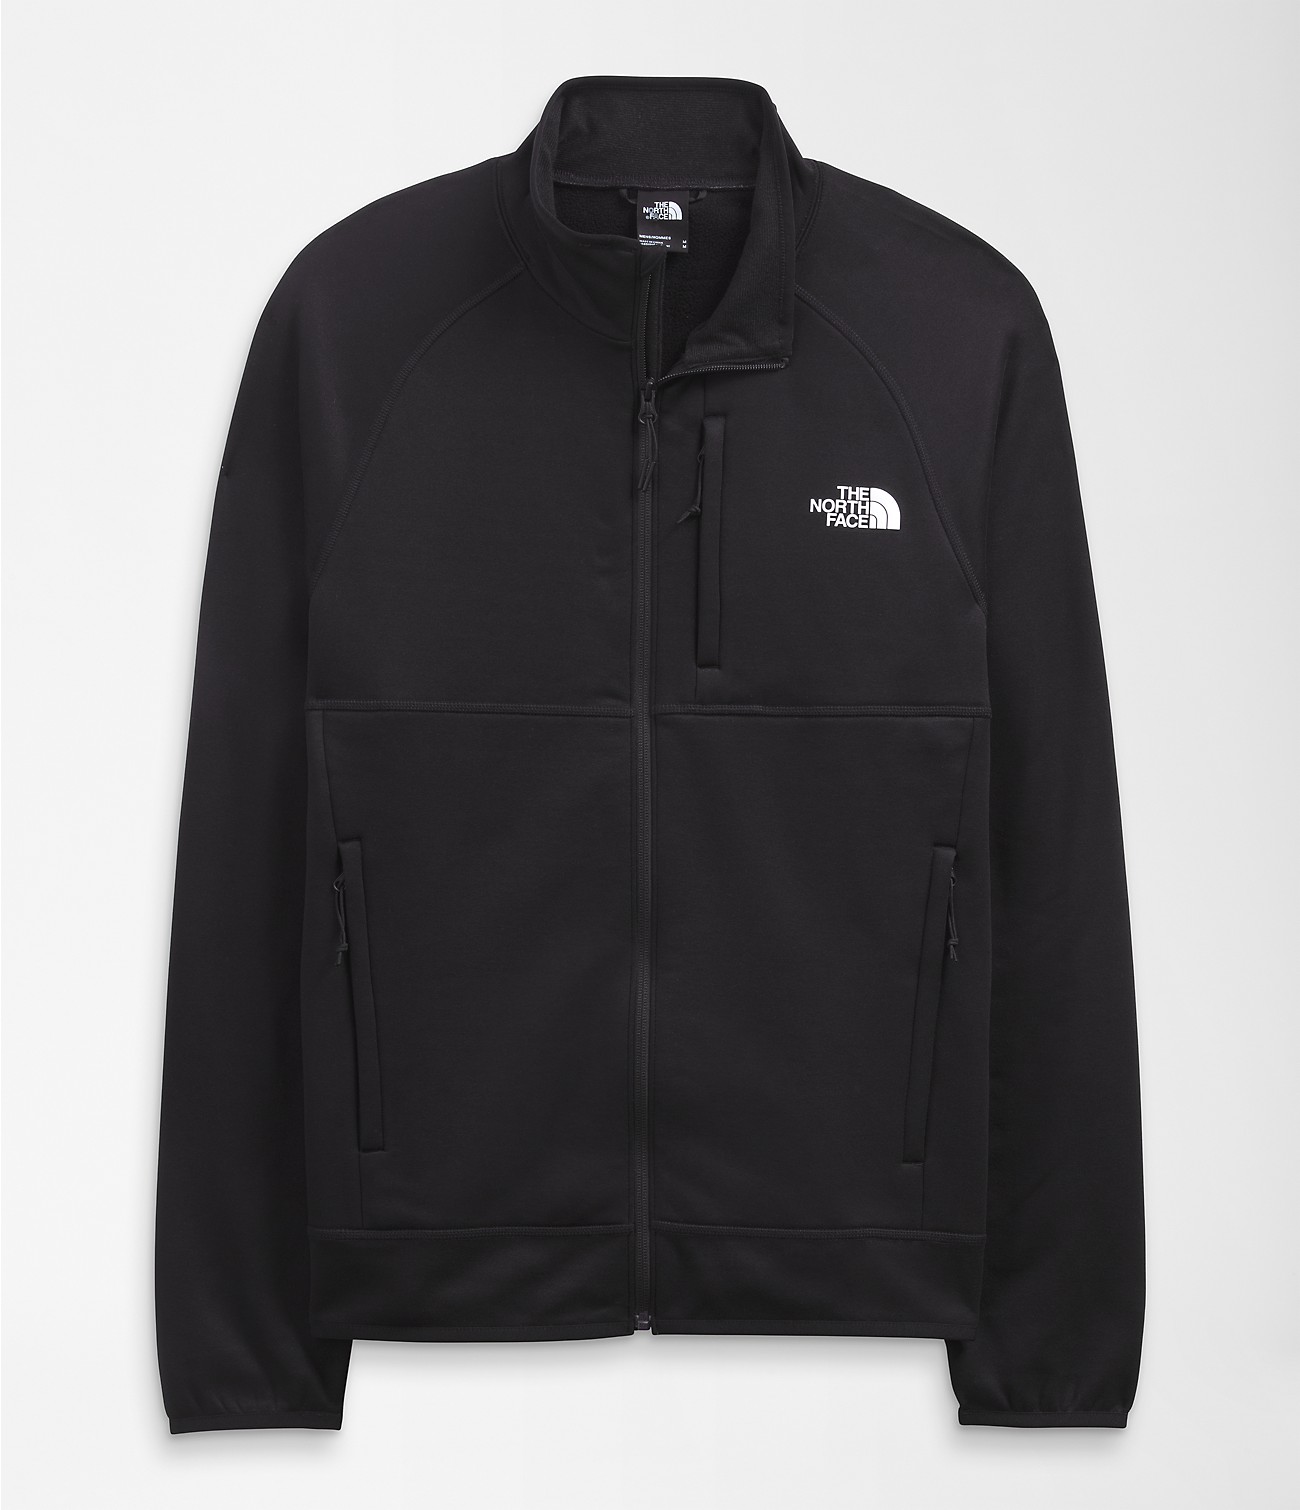 Unlock Wilderness' choice in the Columbia Vs North Face comparison, the Canyonlands Full-Zip by The North Face